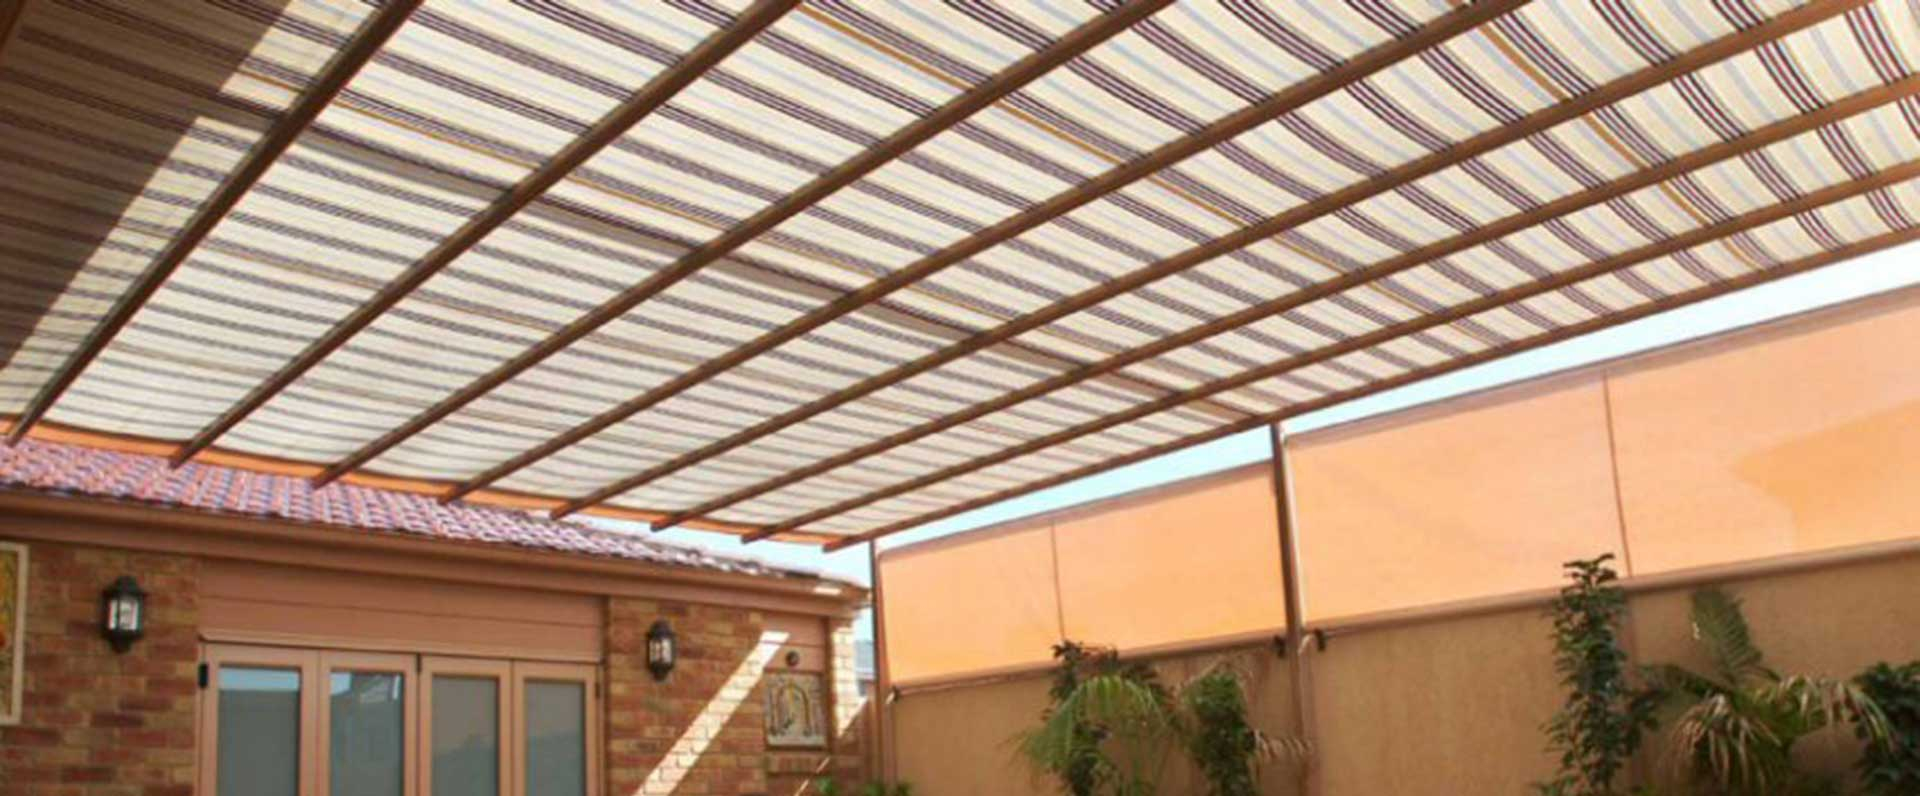 Patio Blinds Melbourne Undercover Blinds Victoria throughout dimensions 1920 X 796